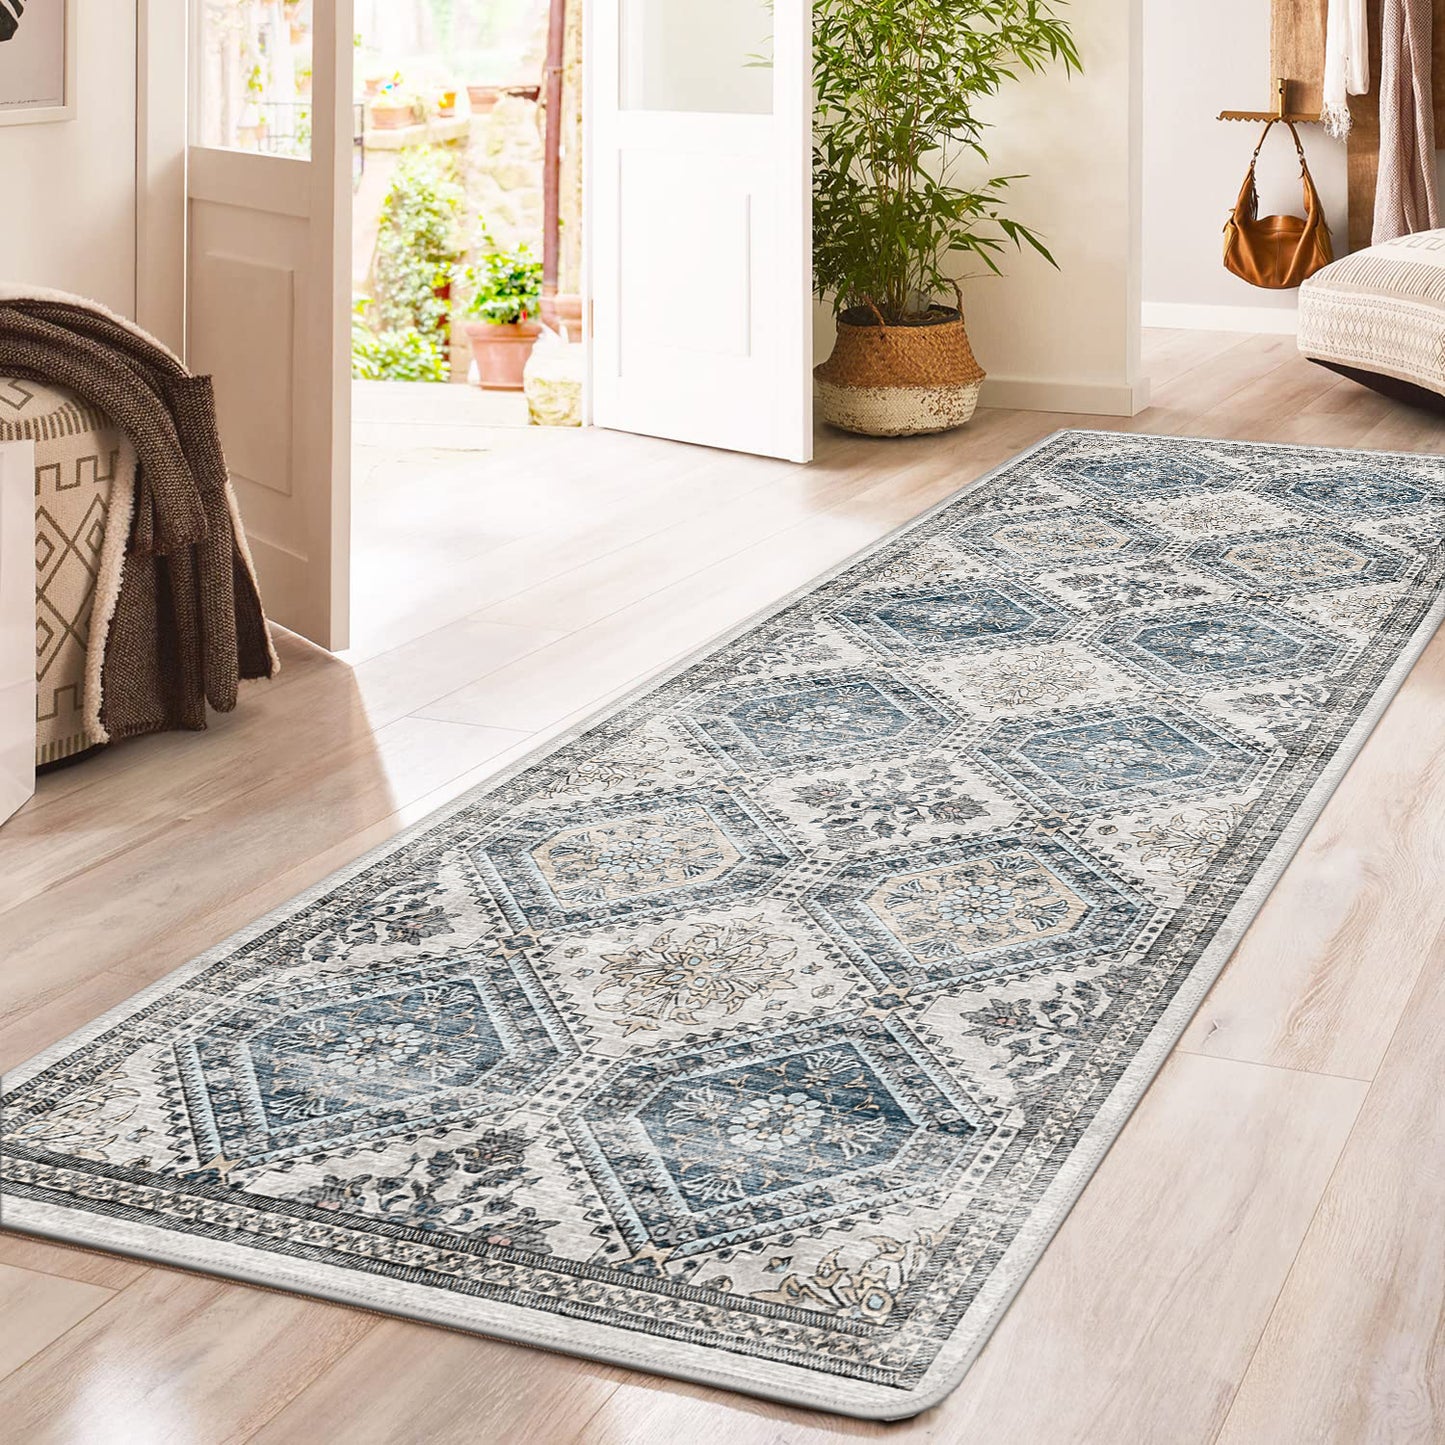 GENIMO Area Rugs, Non Slip Machine Washable Indoor Rug, Low Pile Chenille Print Mat for Entrance, Bedroom, Hallway, Living room Kitchen and Bathroom